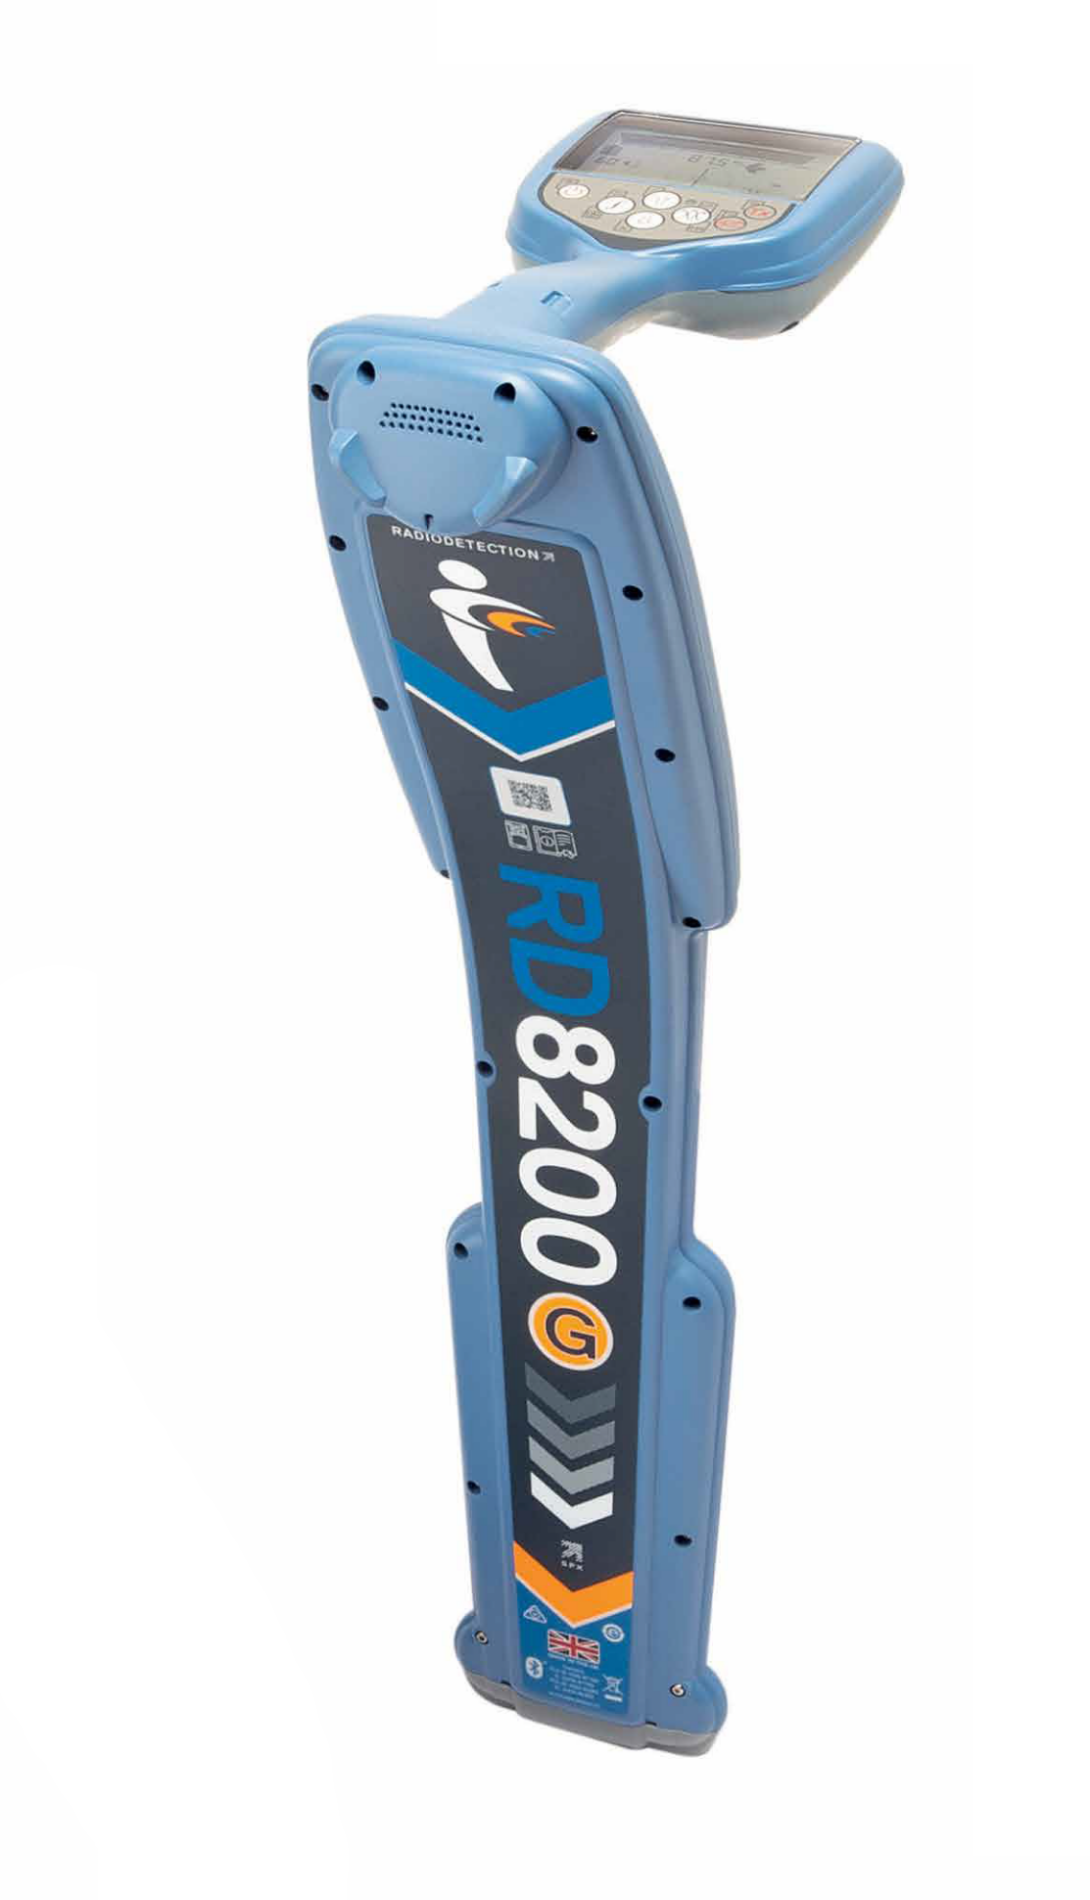 Picture of Radiodetection RD8200 Precision Locator